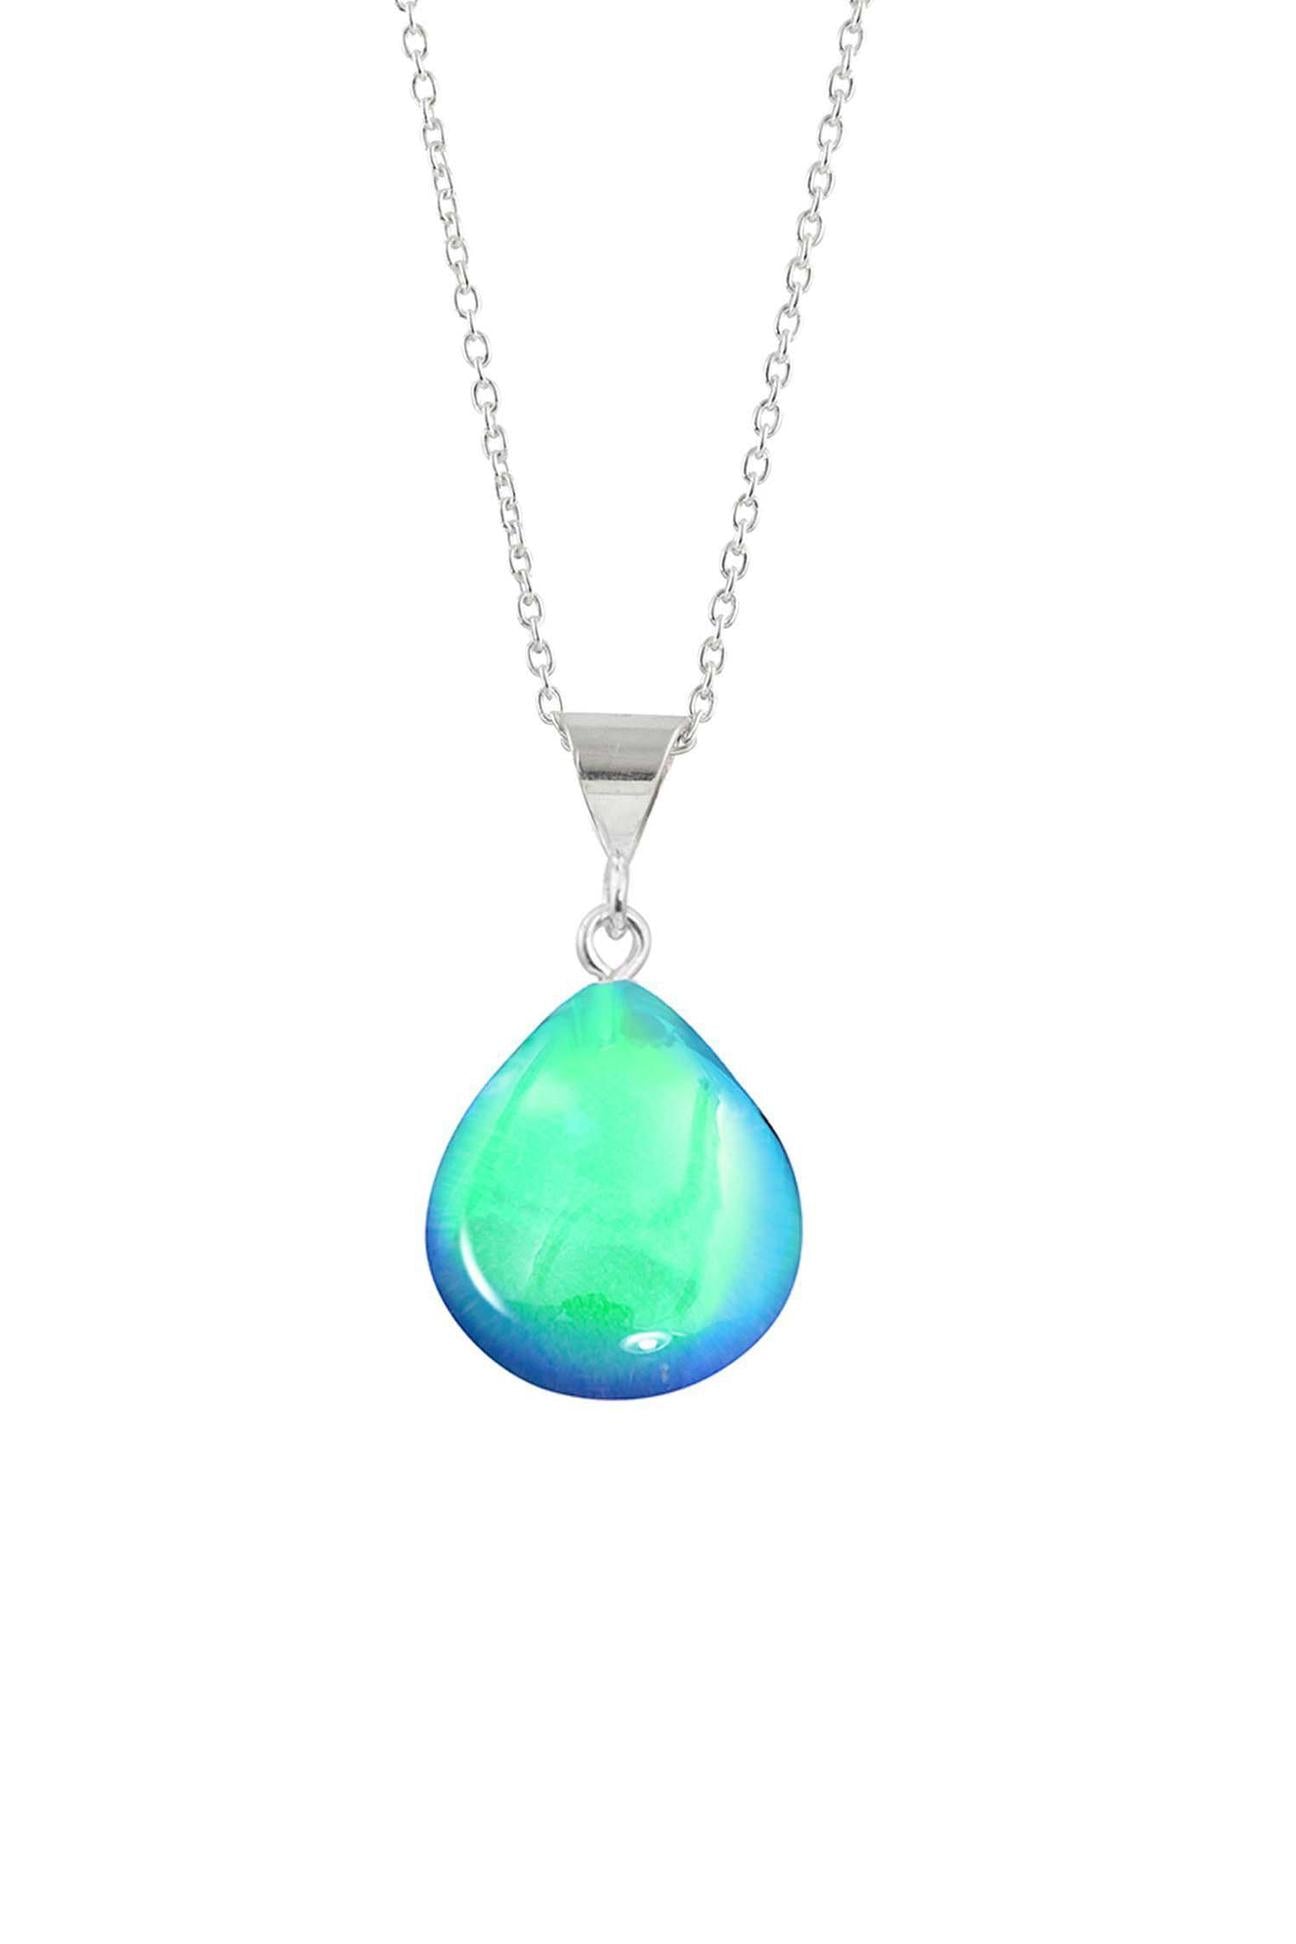 Leightworks X-small Drop Pendant